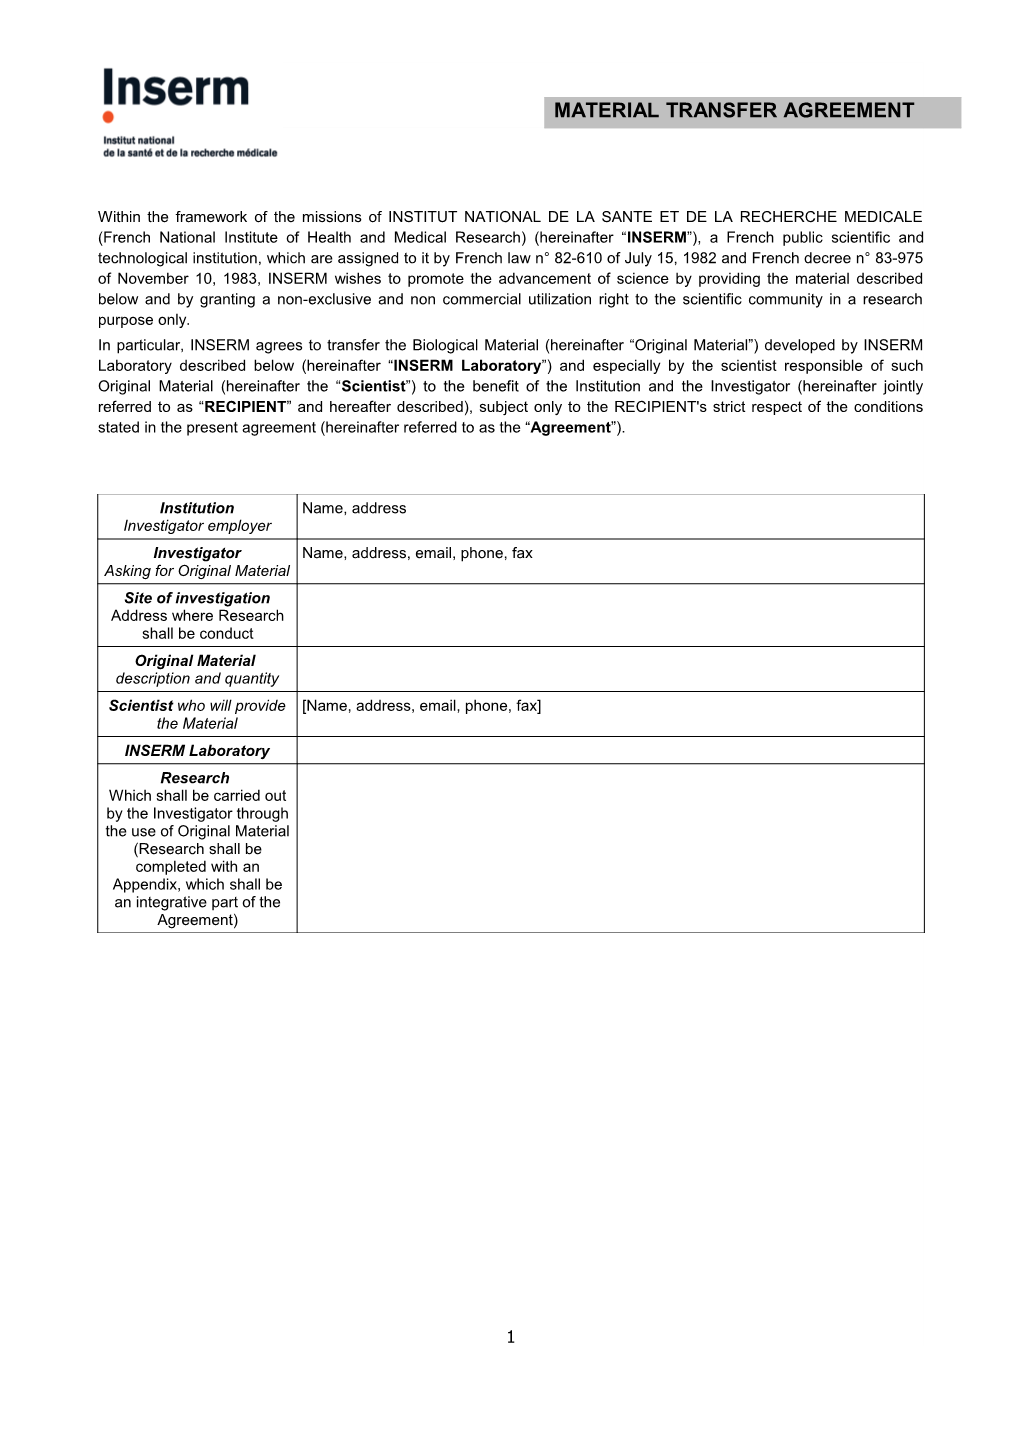 Material Transfer Agreement s4